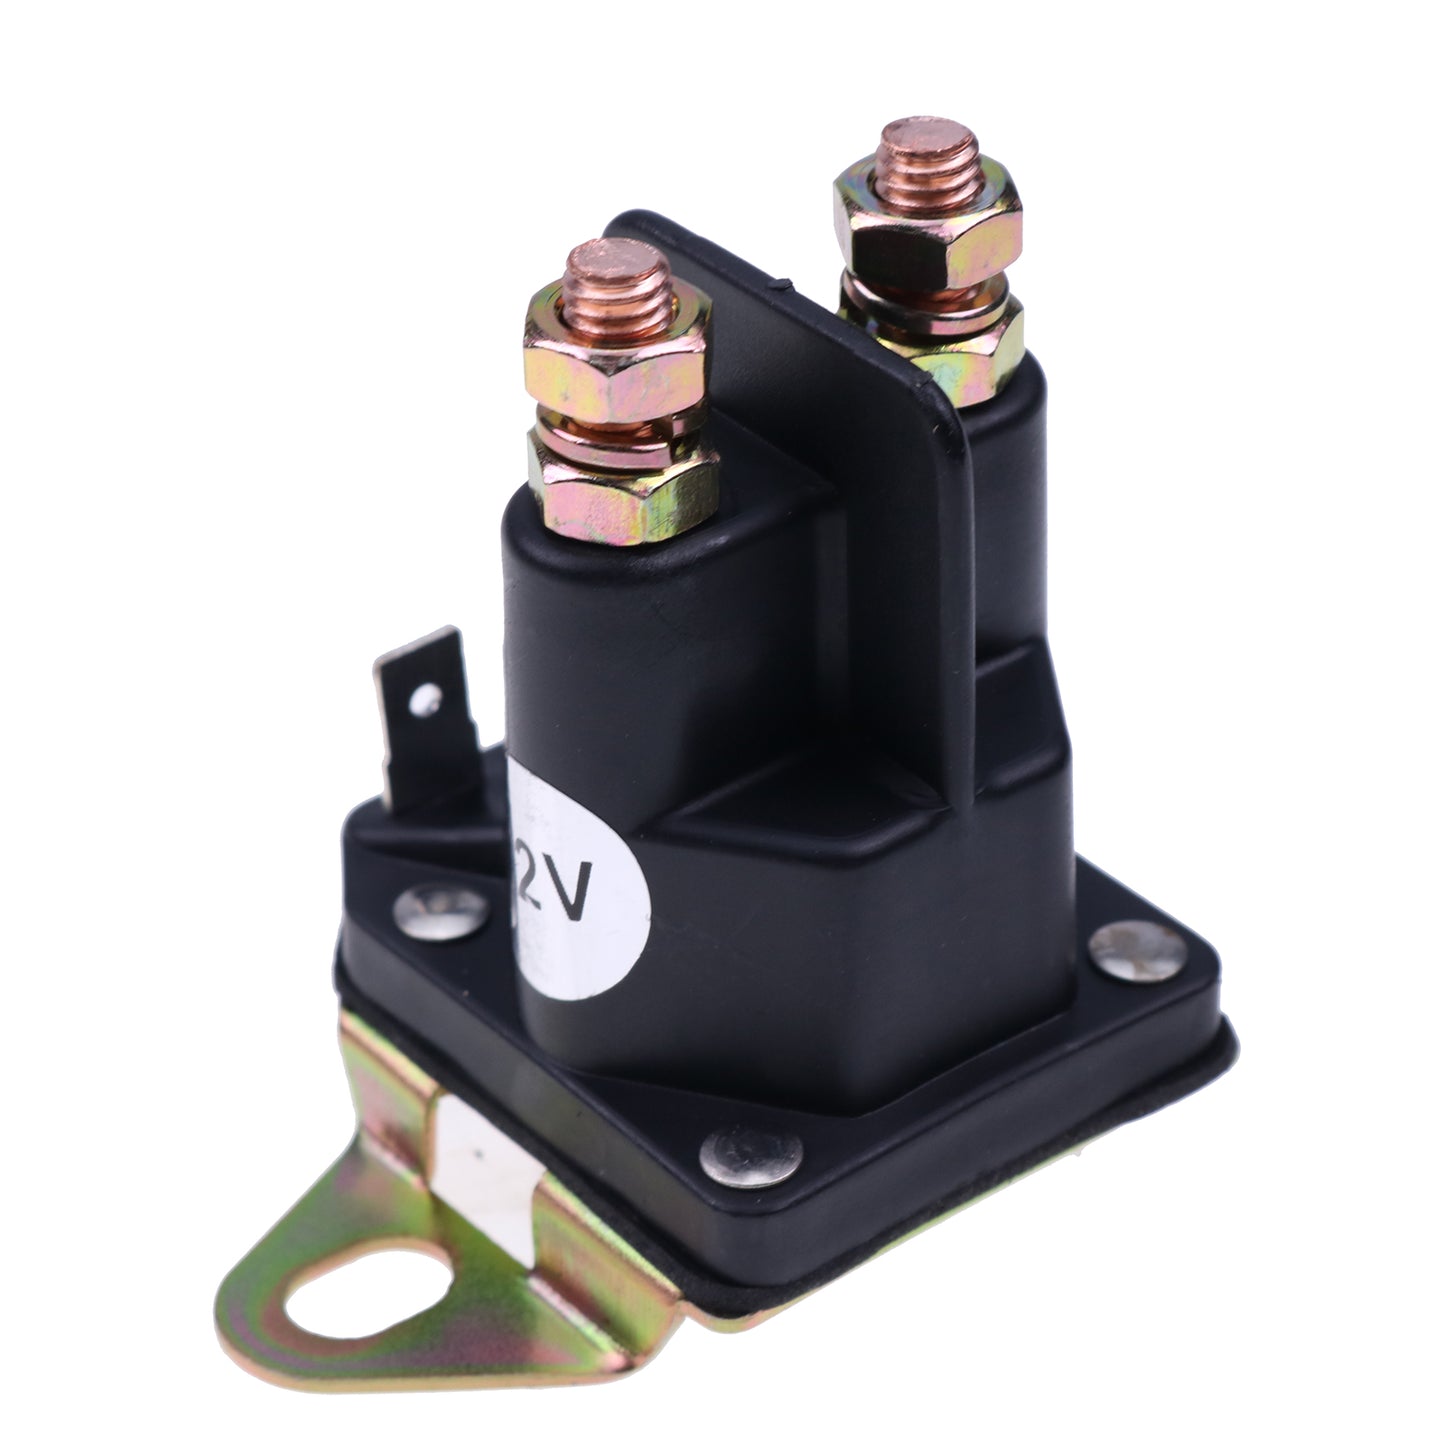 New Lawn Mower Starter Solenoid Relay Compatible with Cub Cadet 192507 532192507 Husqvarna 582042801 582042802 AYP Craftsman Tractors